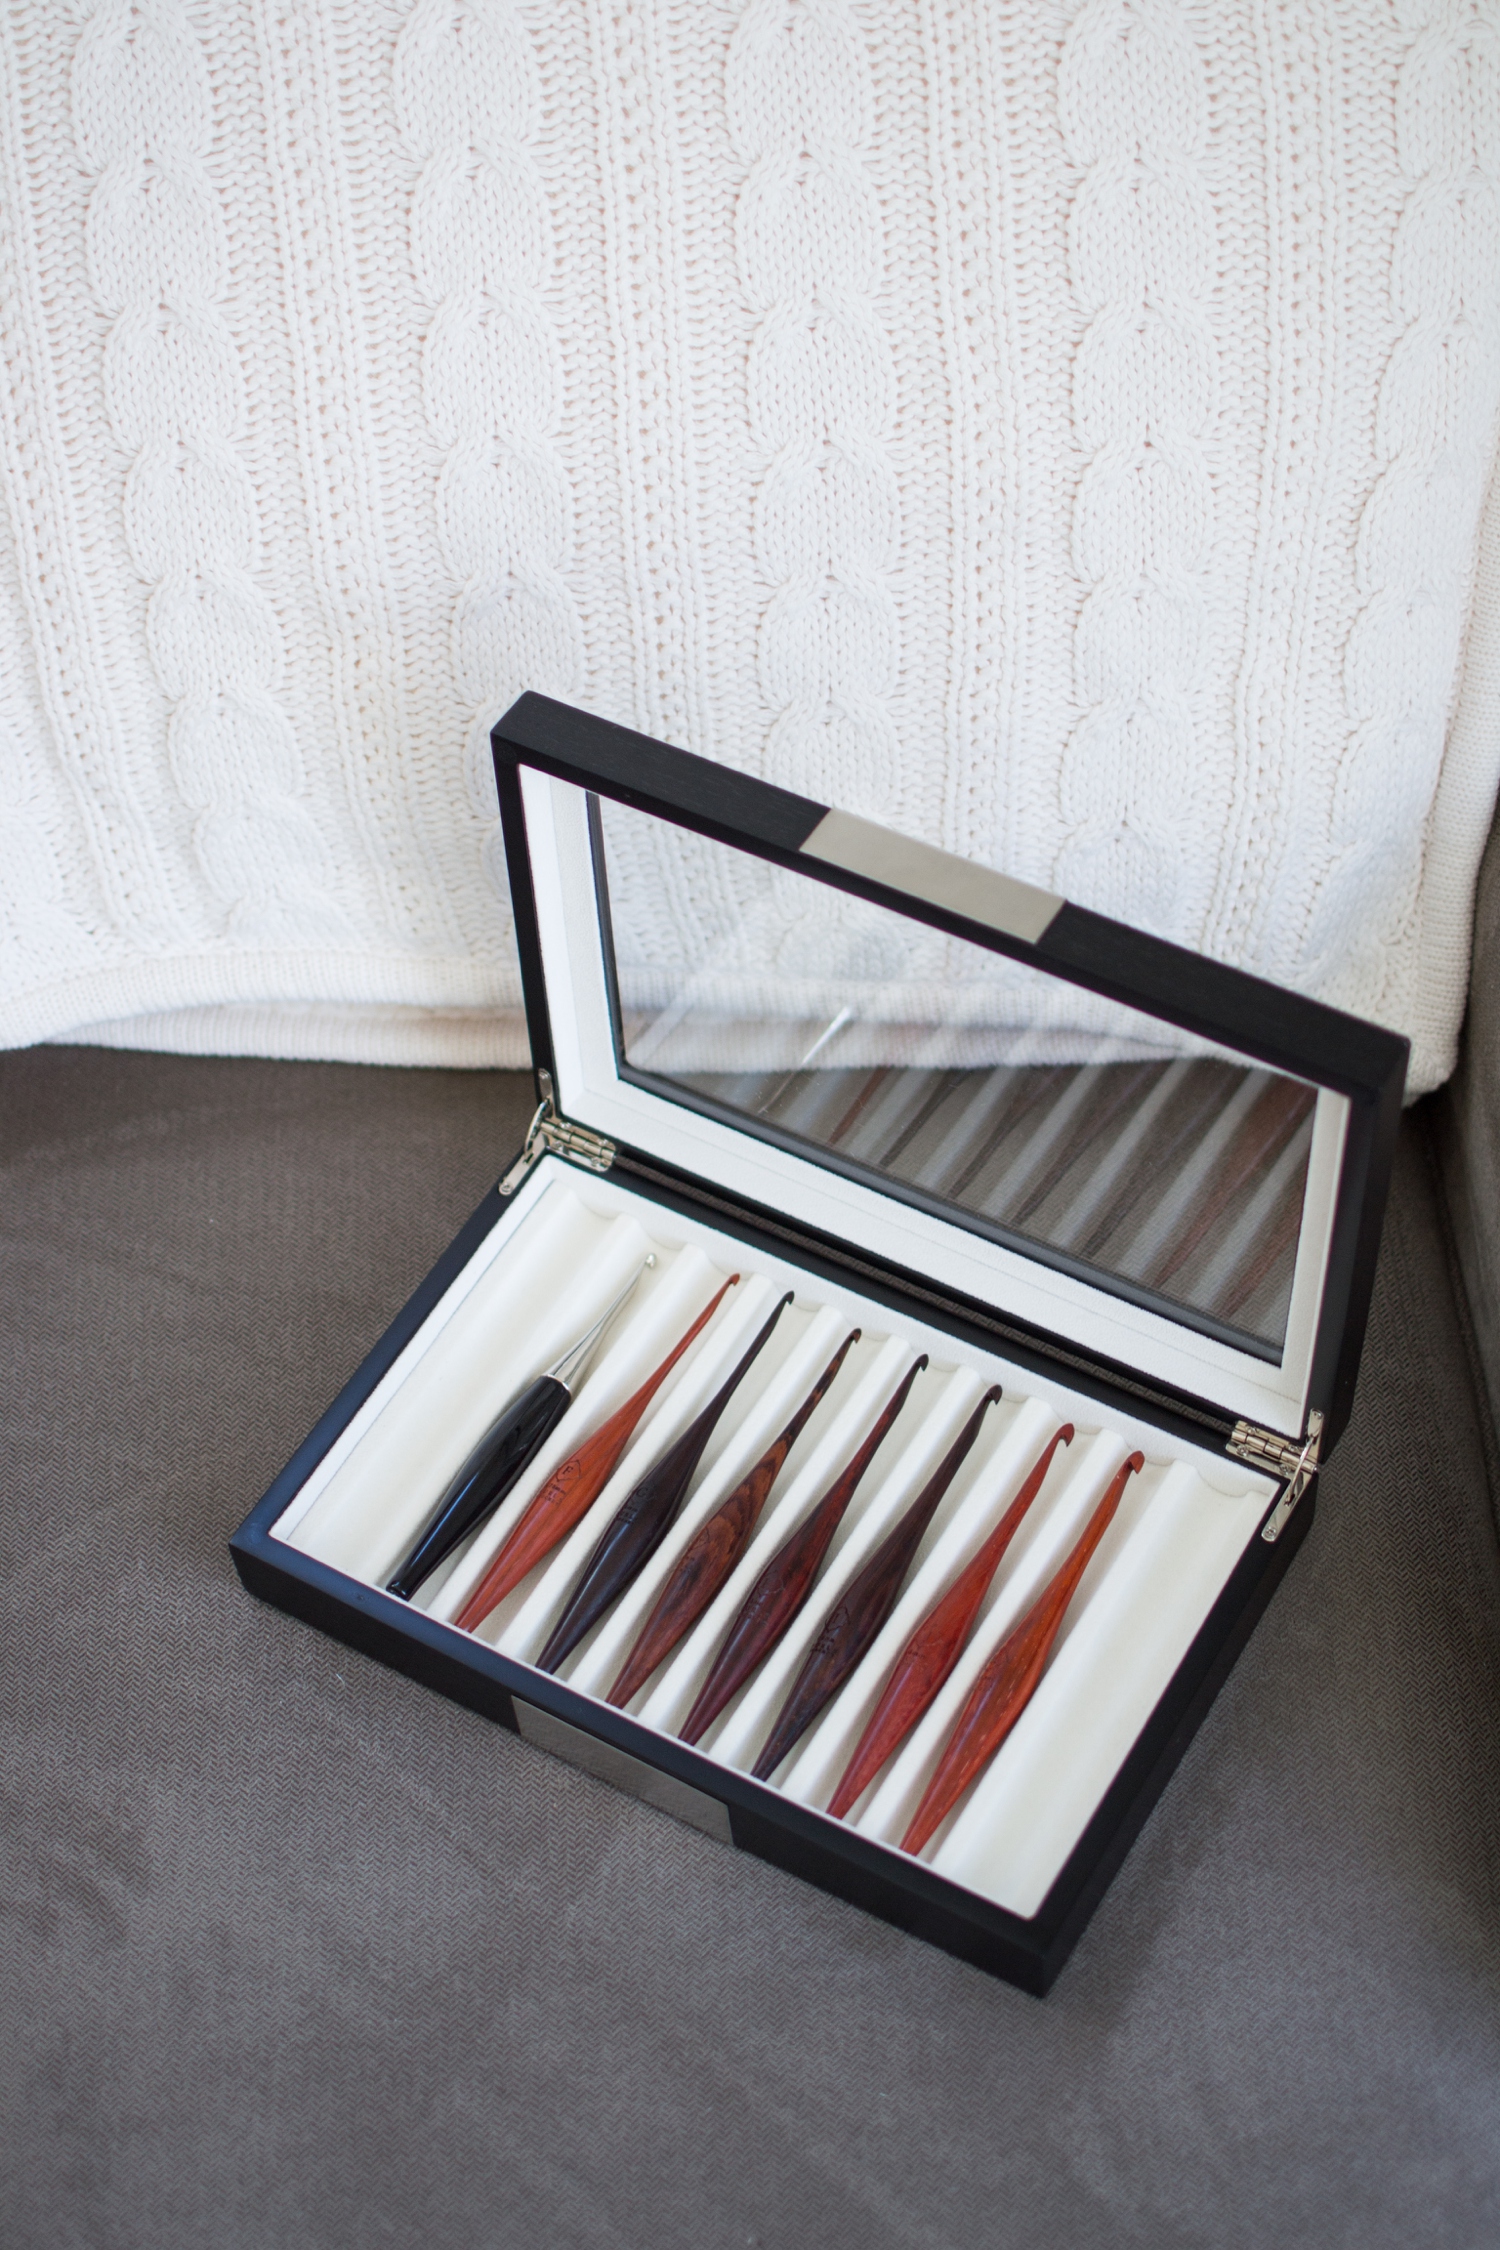 My Furls Crochet Hooks & Collector's Box - Woods and Wool